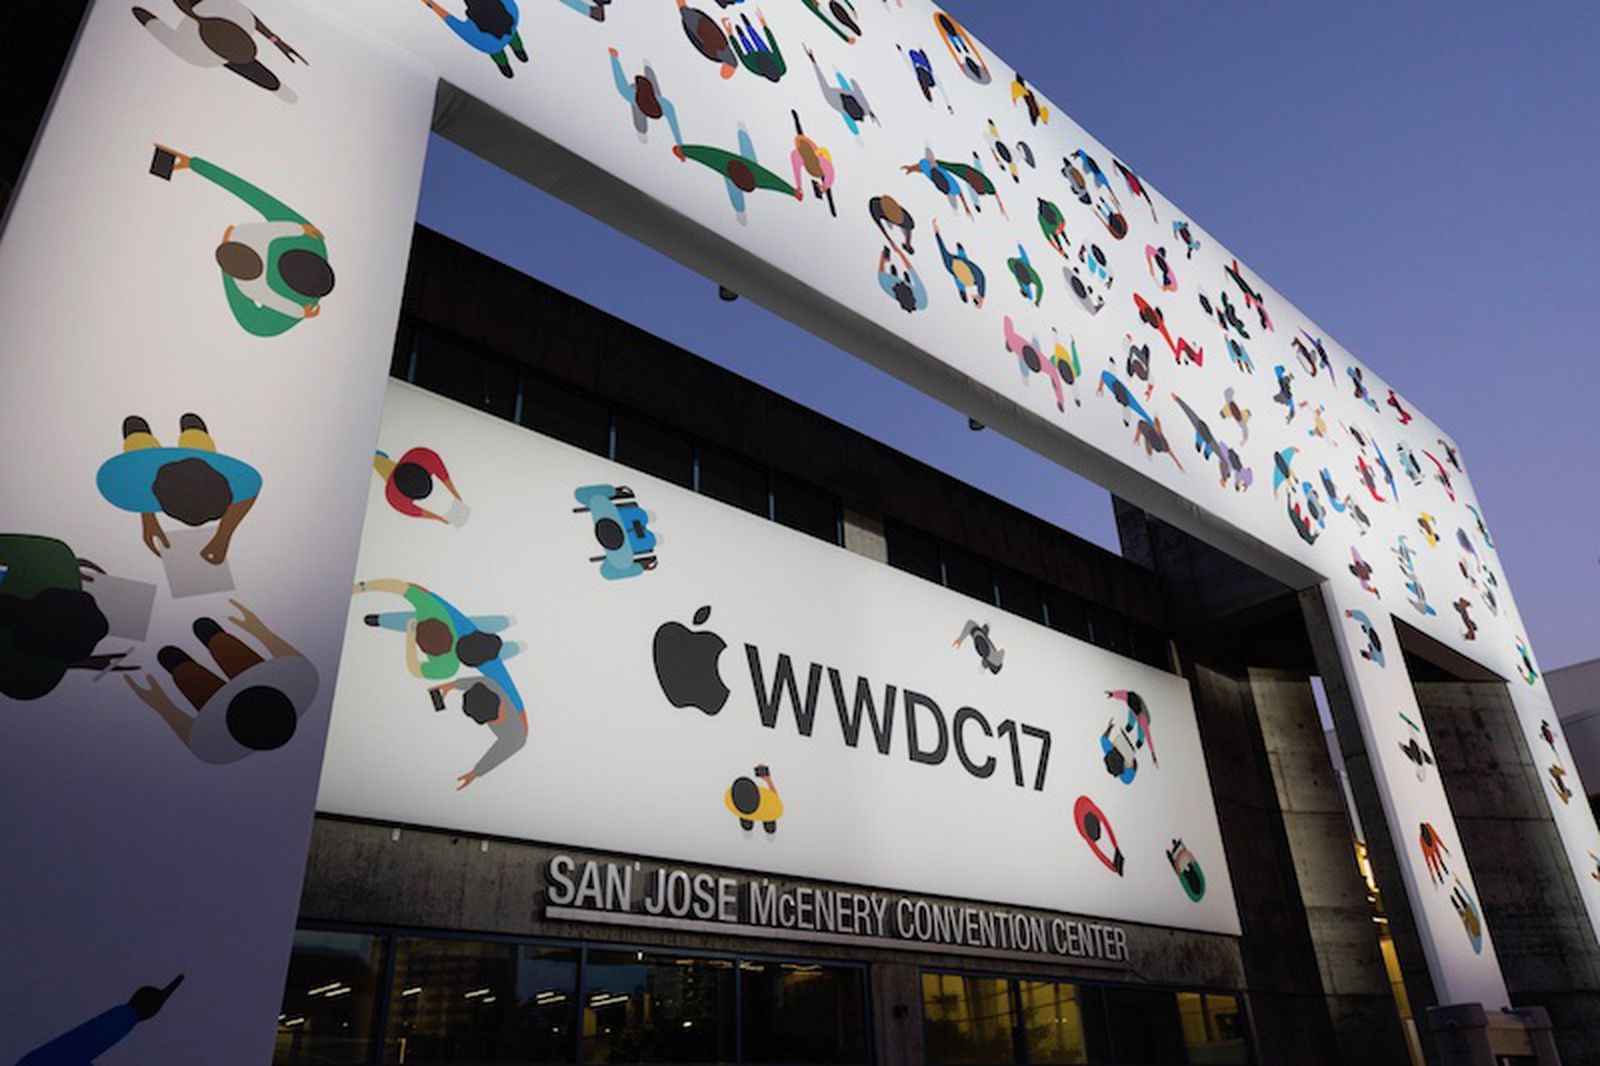 Looking Back at WWDC Hardware Announcements HomePod, Mac Pro, and More